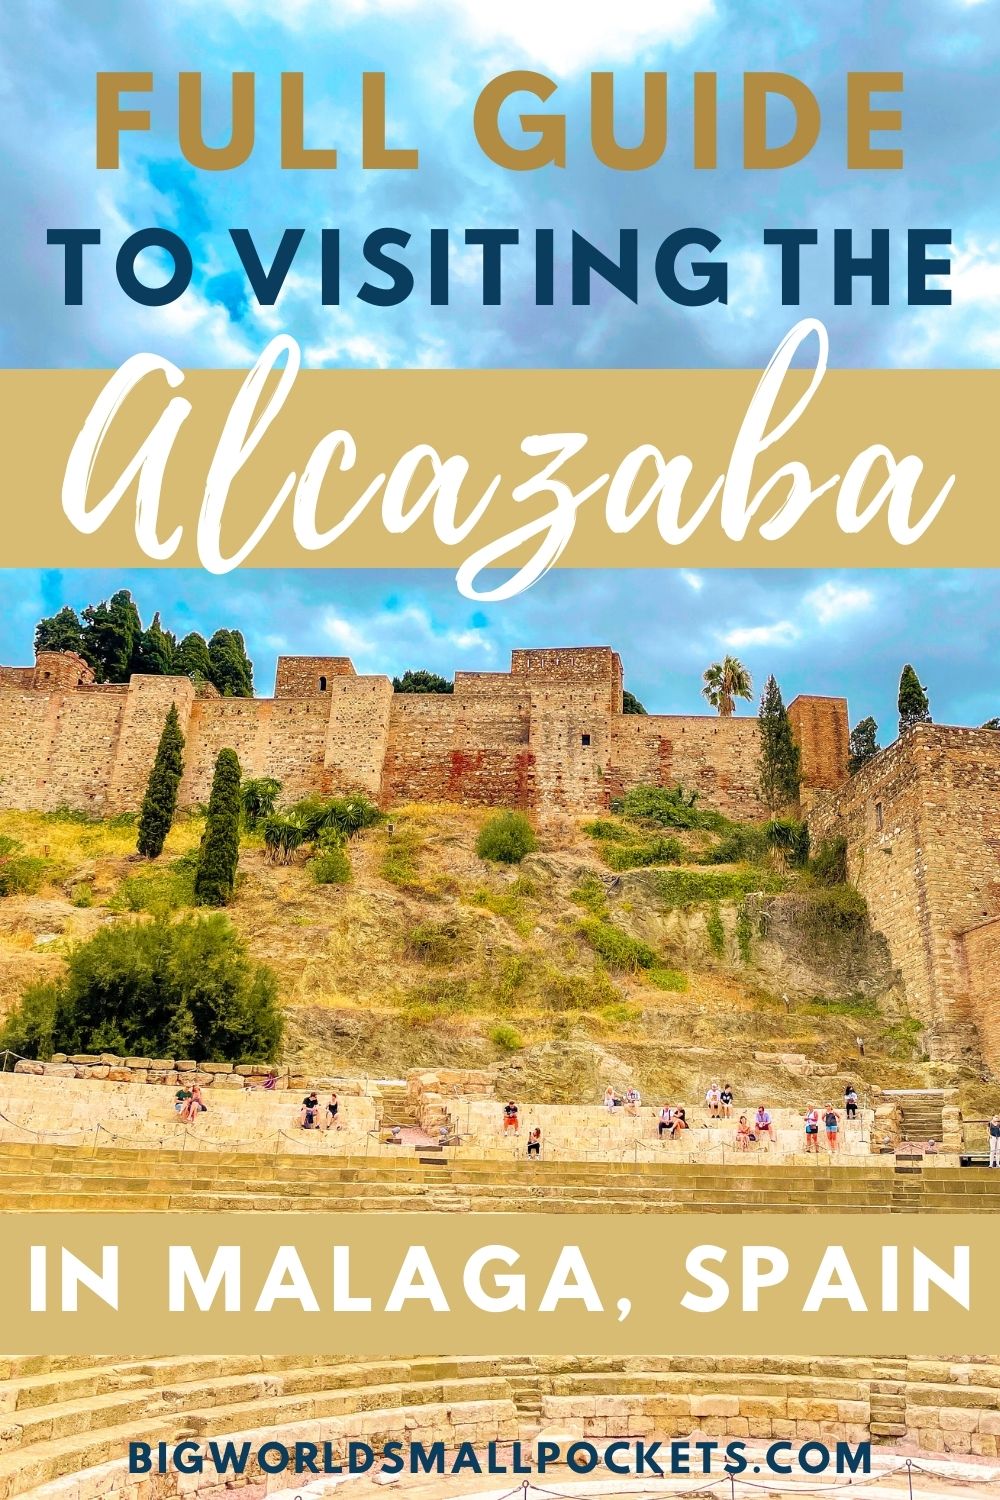 Ultimate Guide to Visiting the Alcazaba in Malaga, Spain